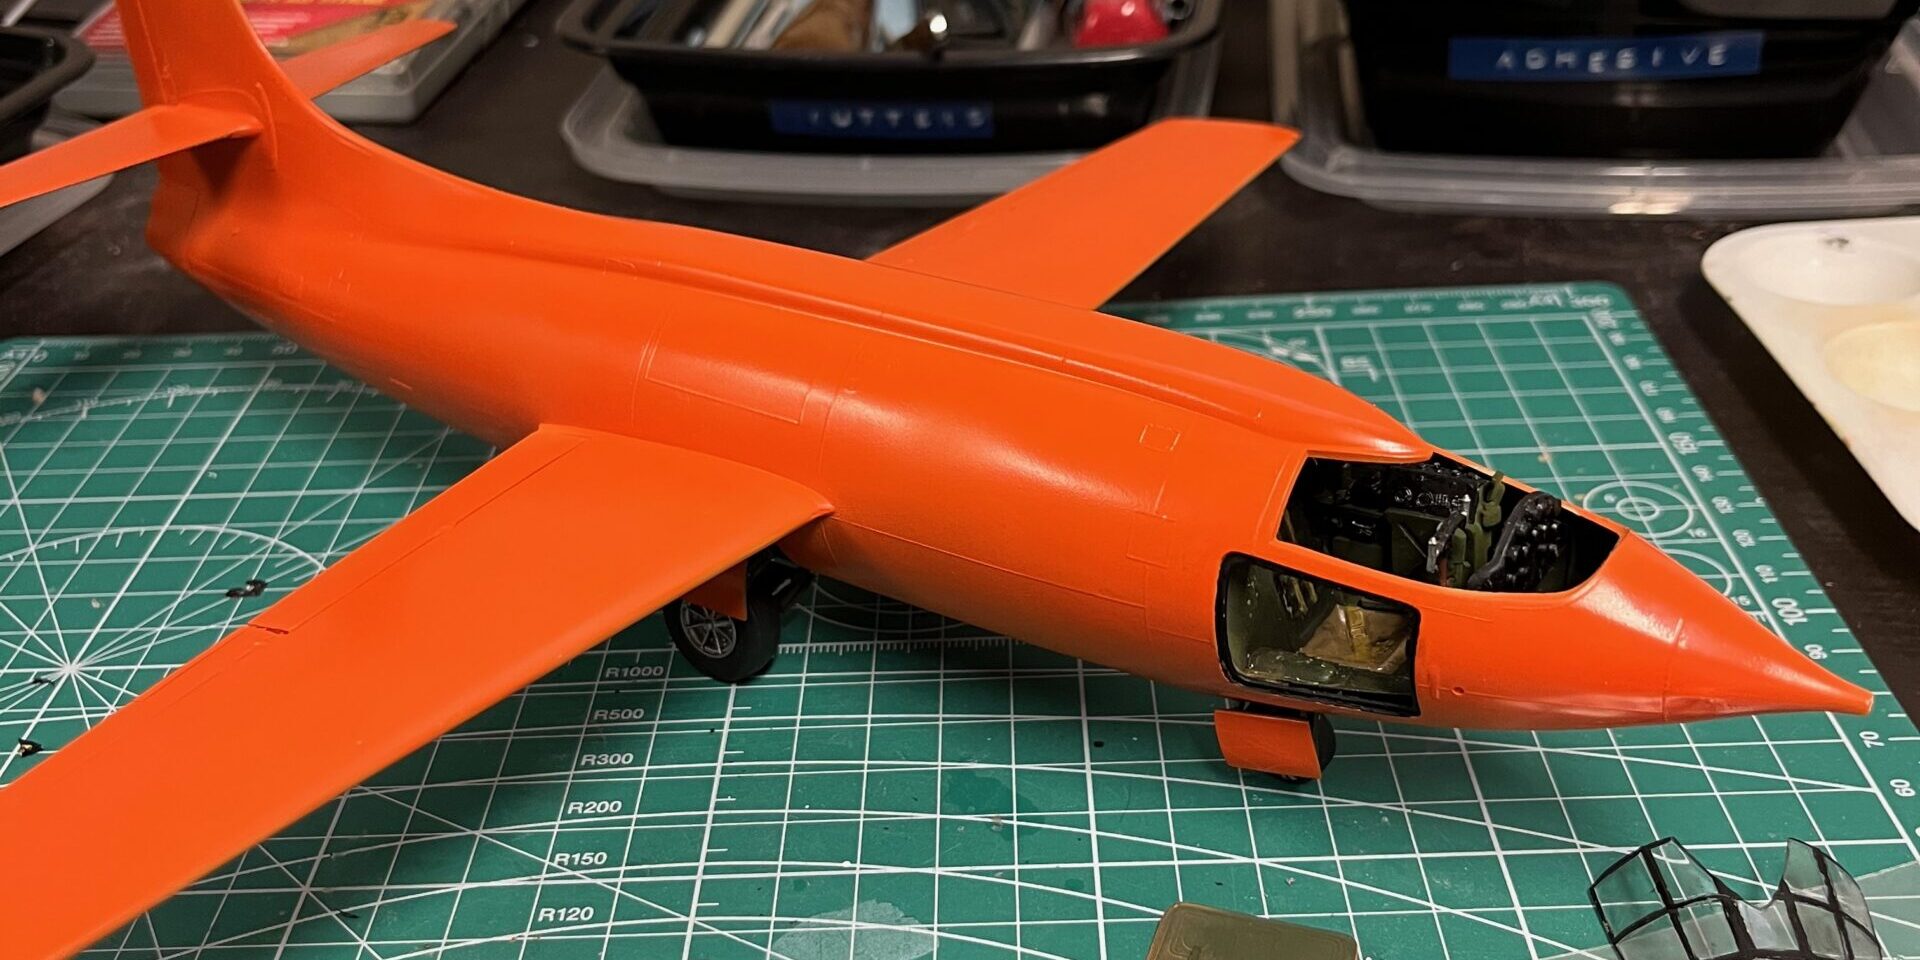 Build Log: Painting the X-1